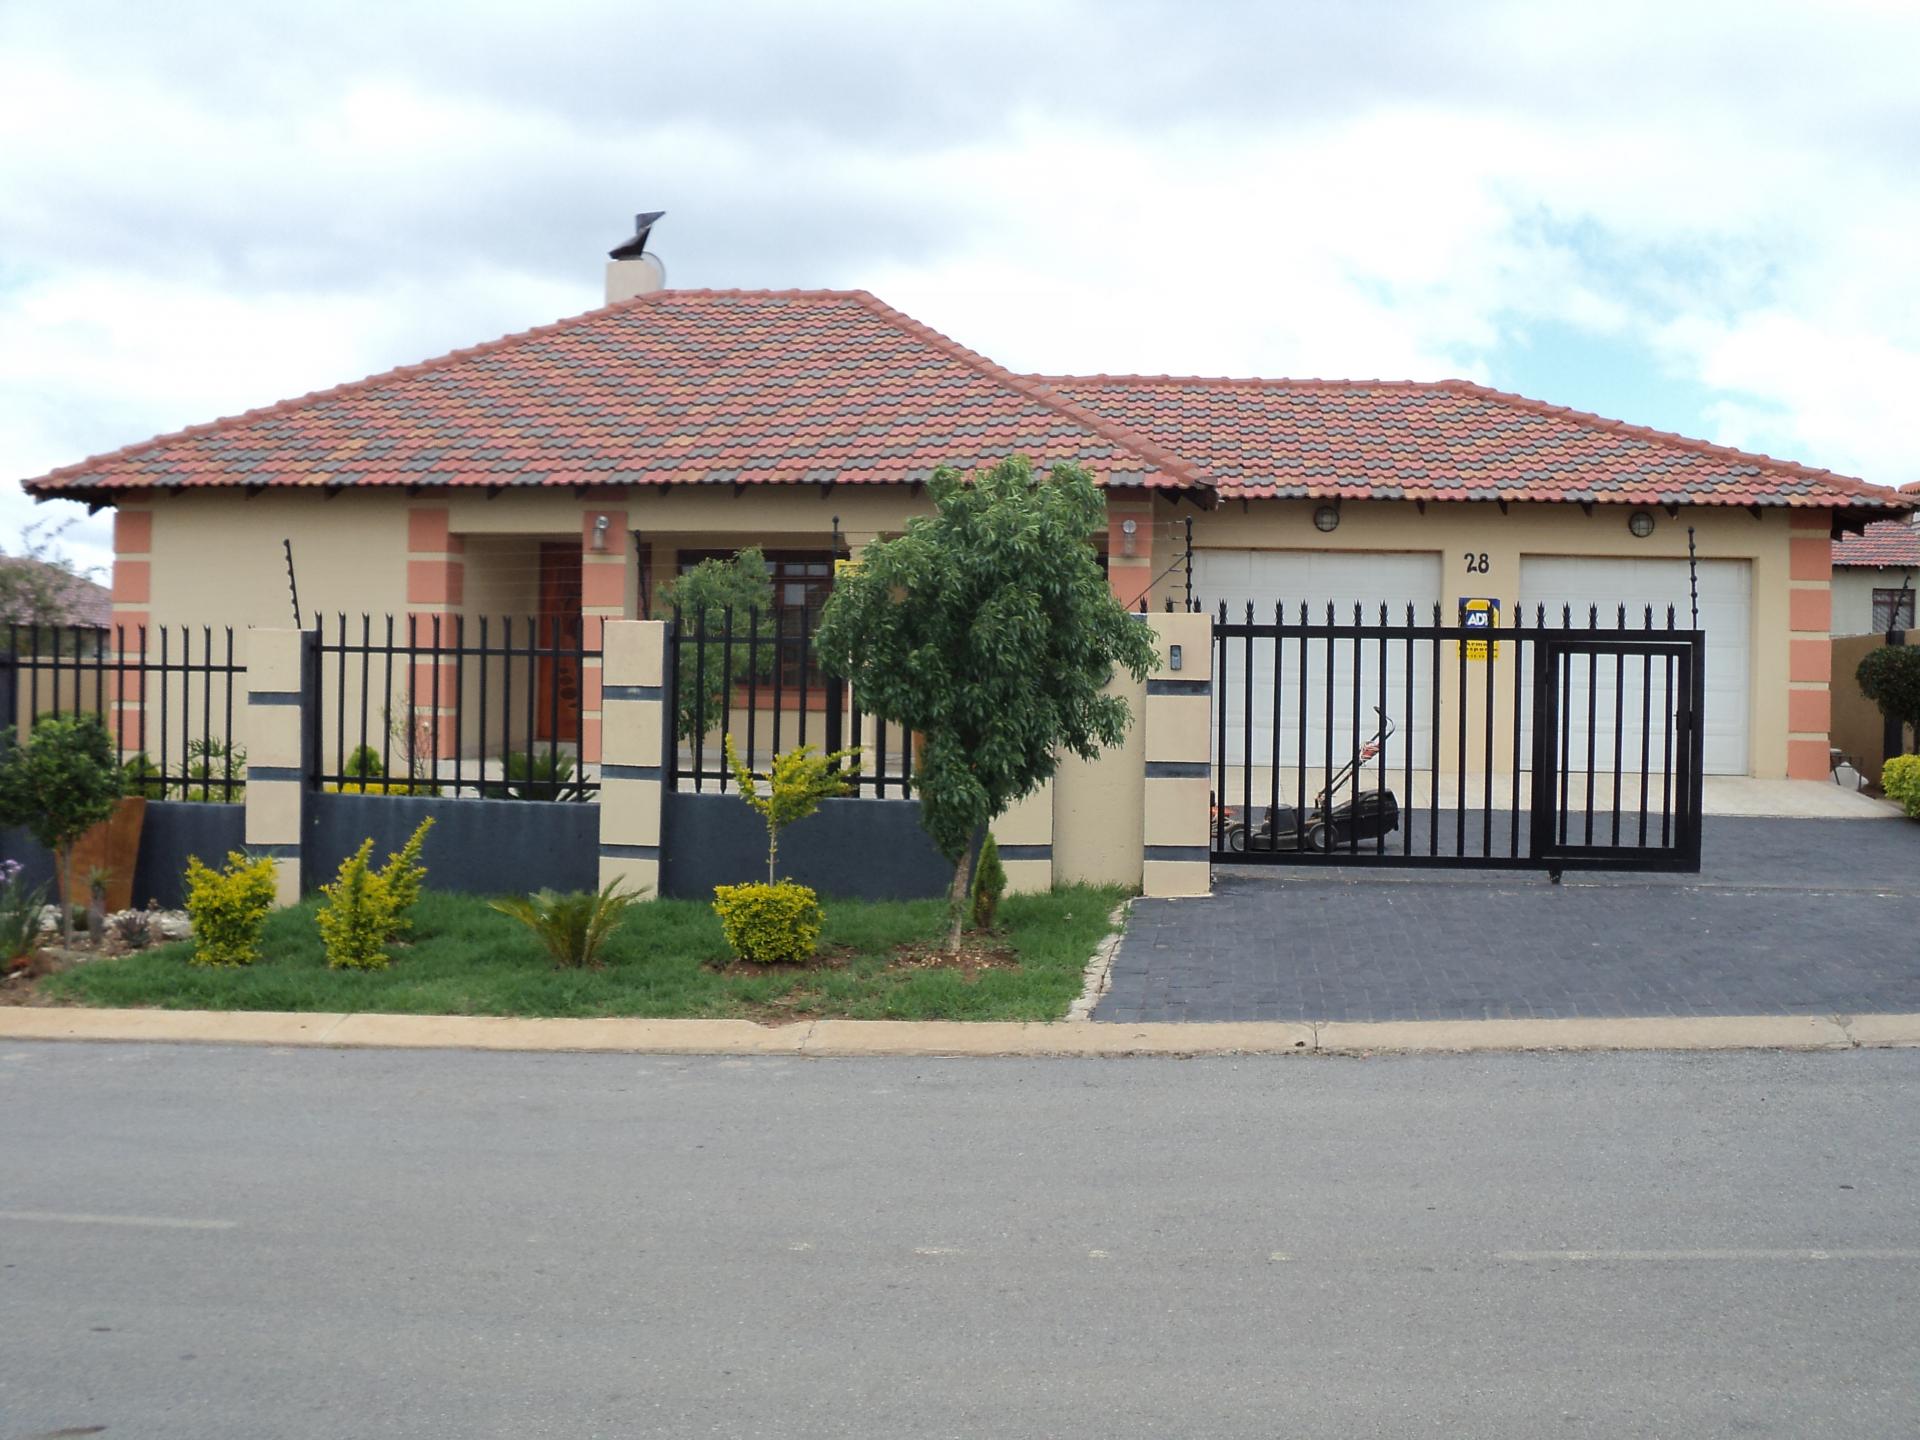 4 bedroom House  for sale  in Polokwane 